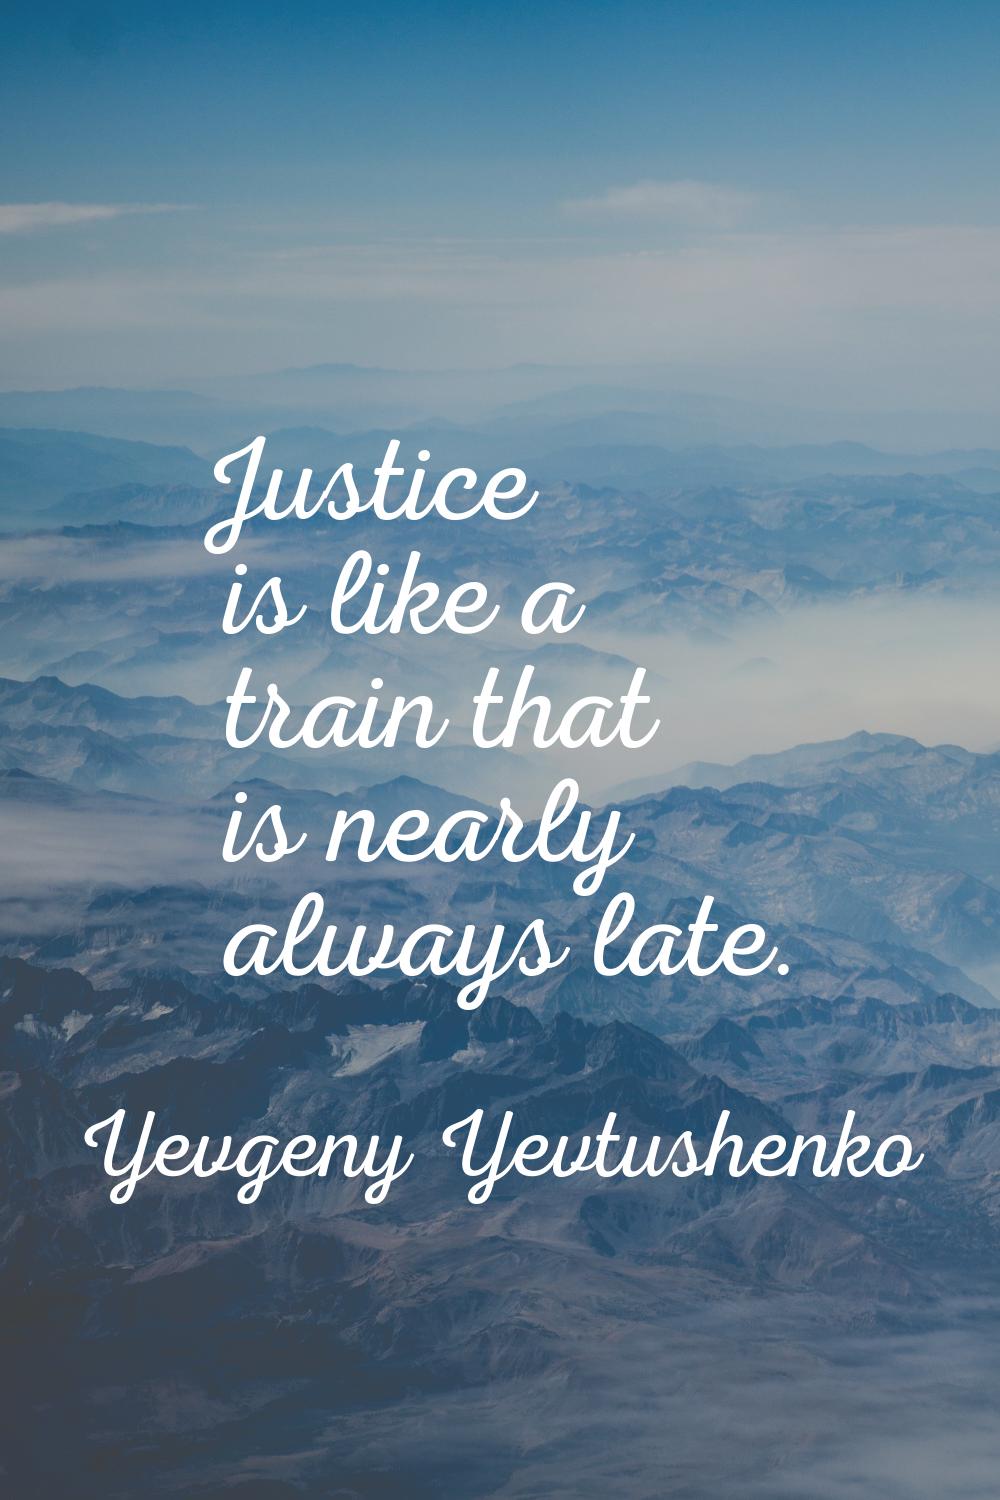 Justice is like a train that is nearly always late.